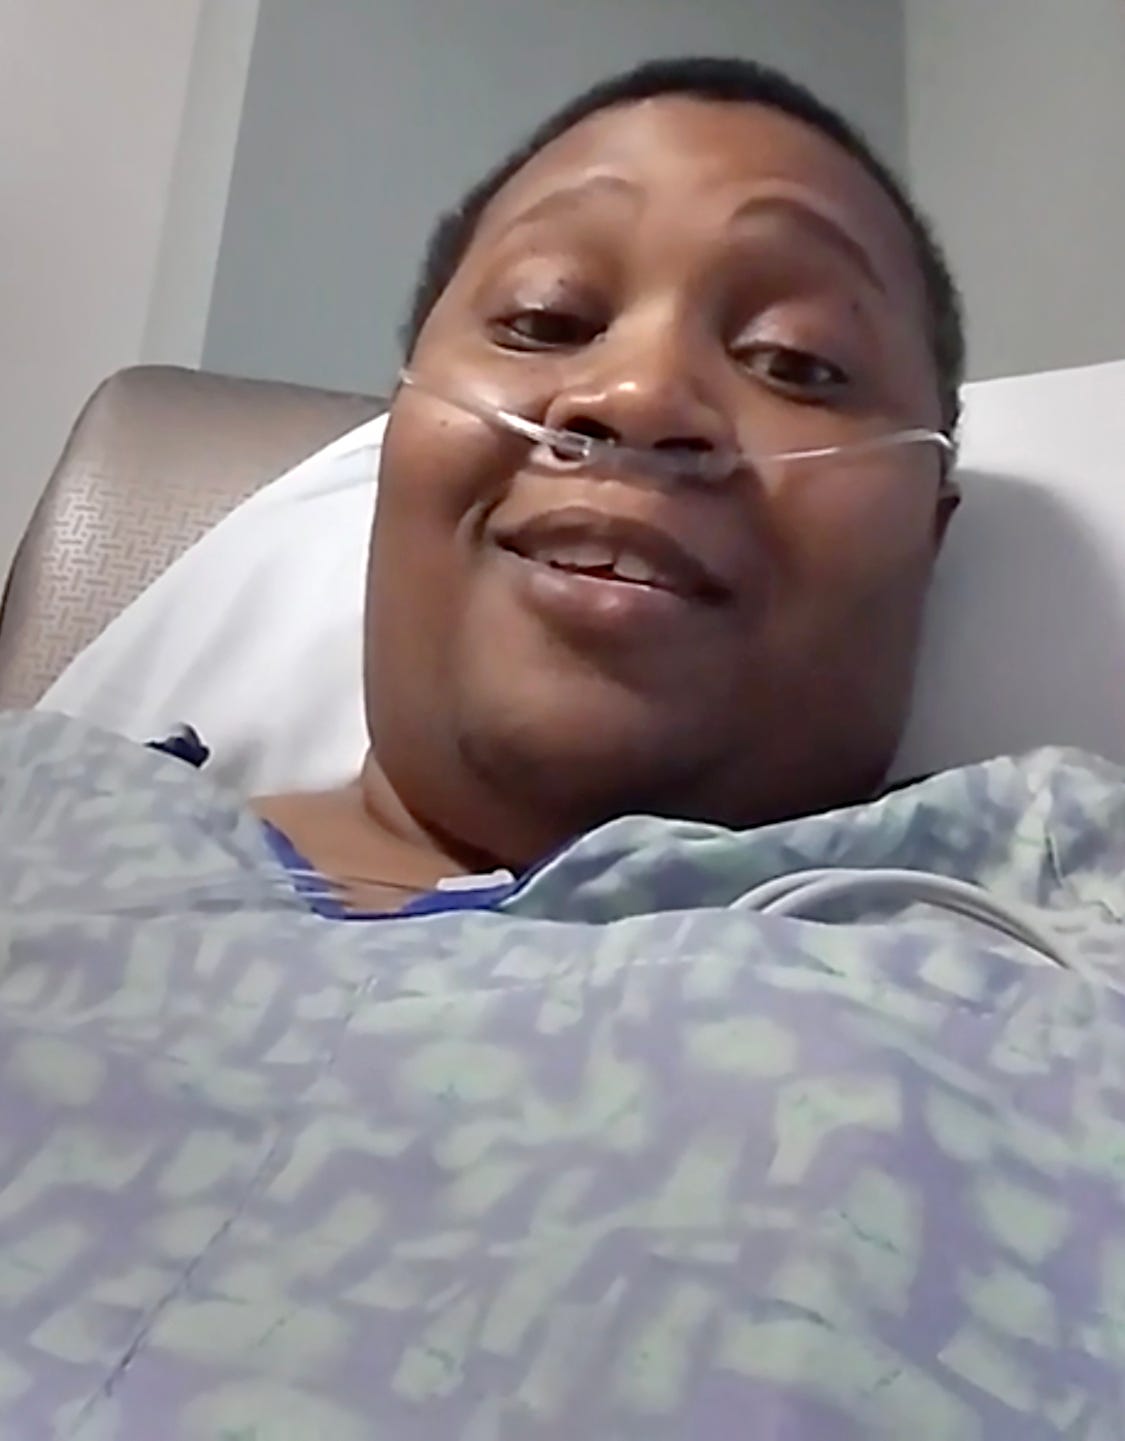 Monique Baldridge, 52, of Detroit, records herself in a Facebook Live dispatch to family and friends on March 20, 2020 from her bed at Ascension St. John Hospital in Detroit. She died with COVID-19 on March 27, 2020. 